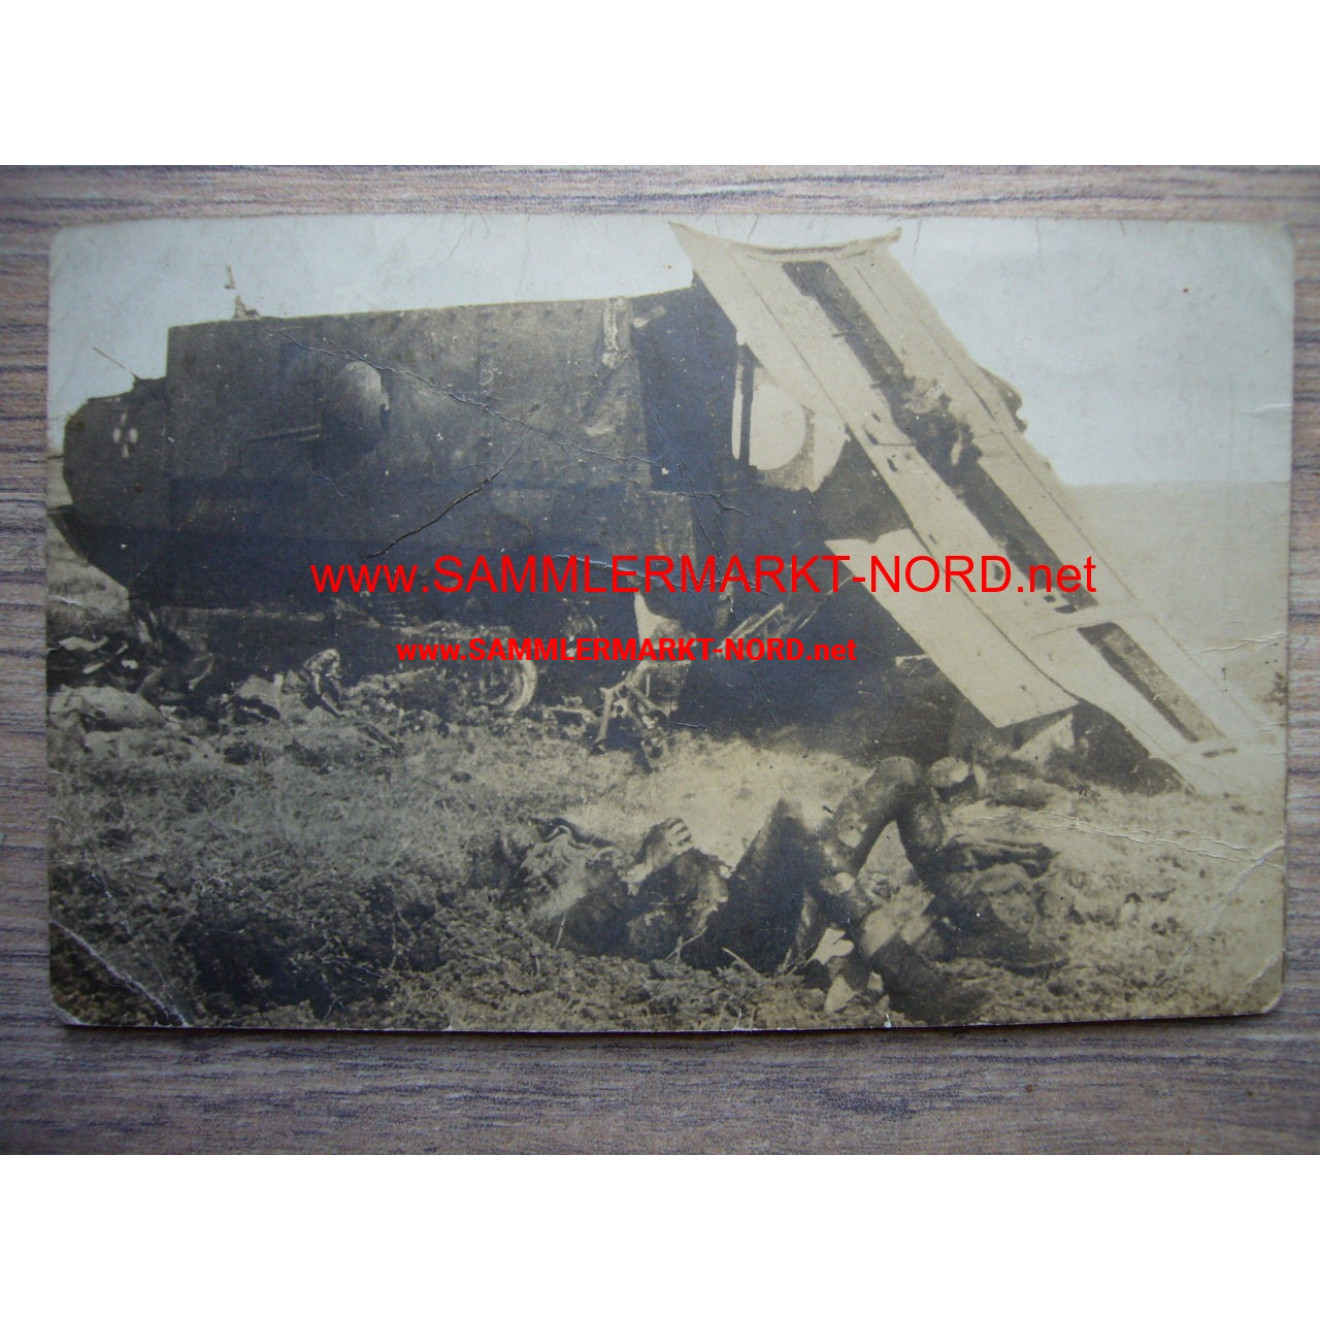 Near Anizy (France) - Destroyed Tank & Dead soldier